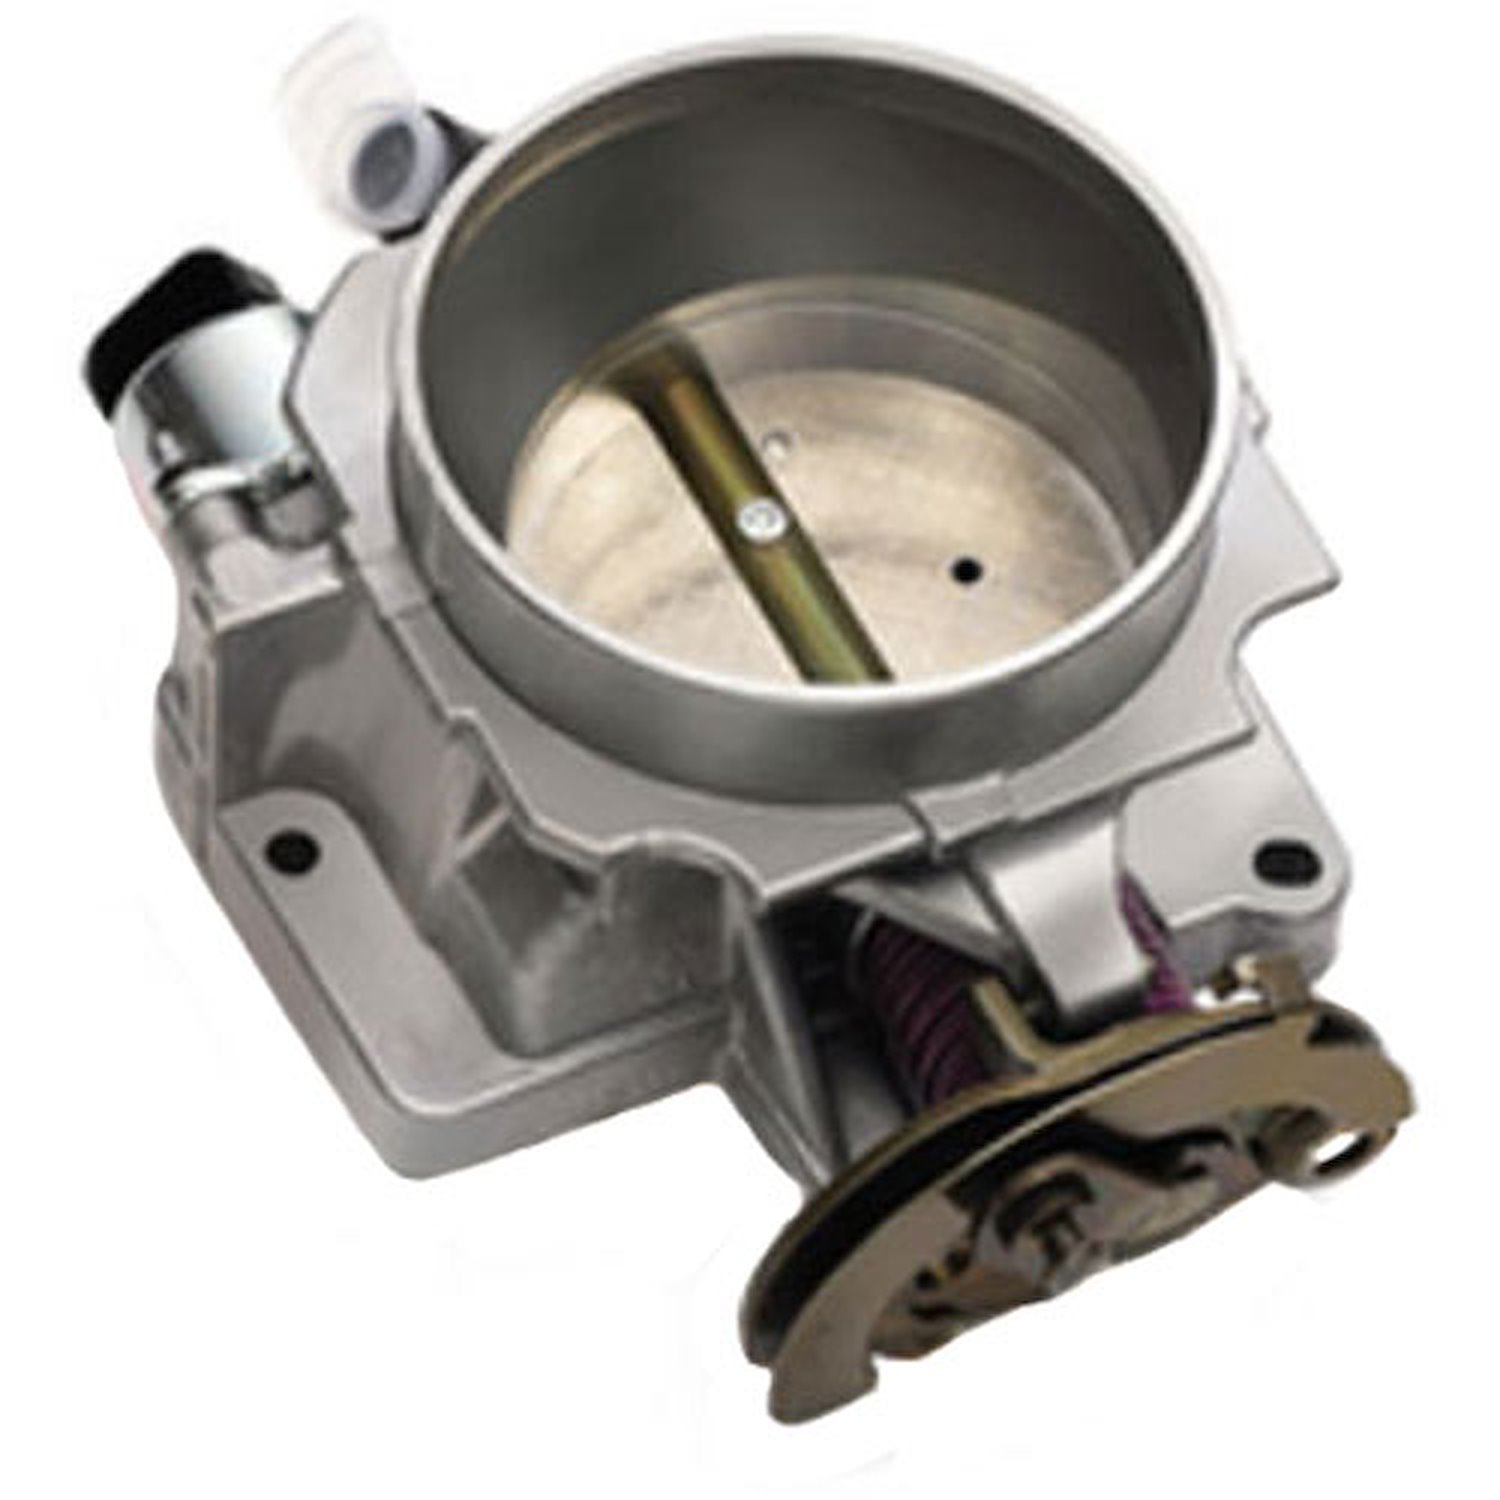 Throttle Body for Ram Jet 350 Crate Engine